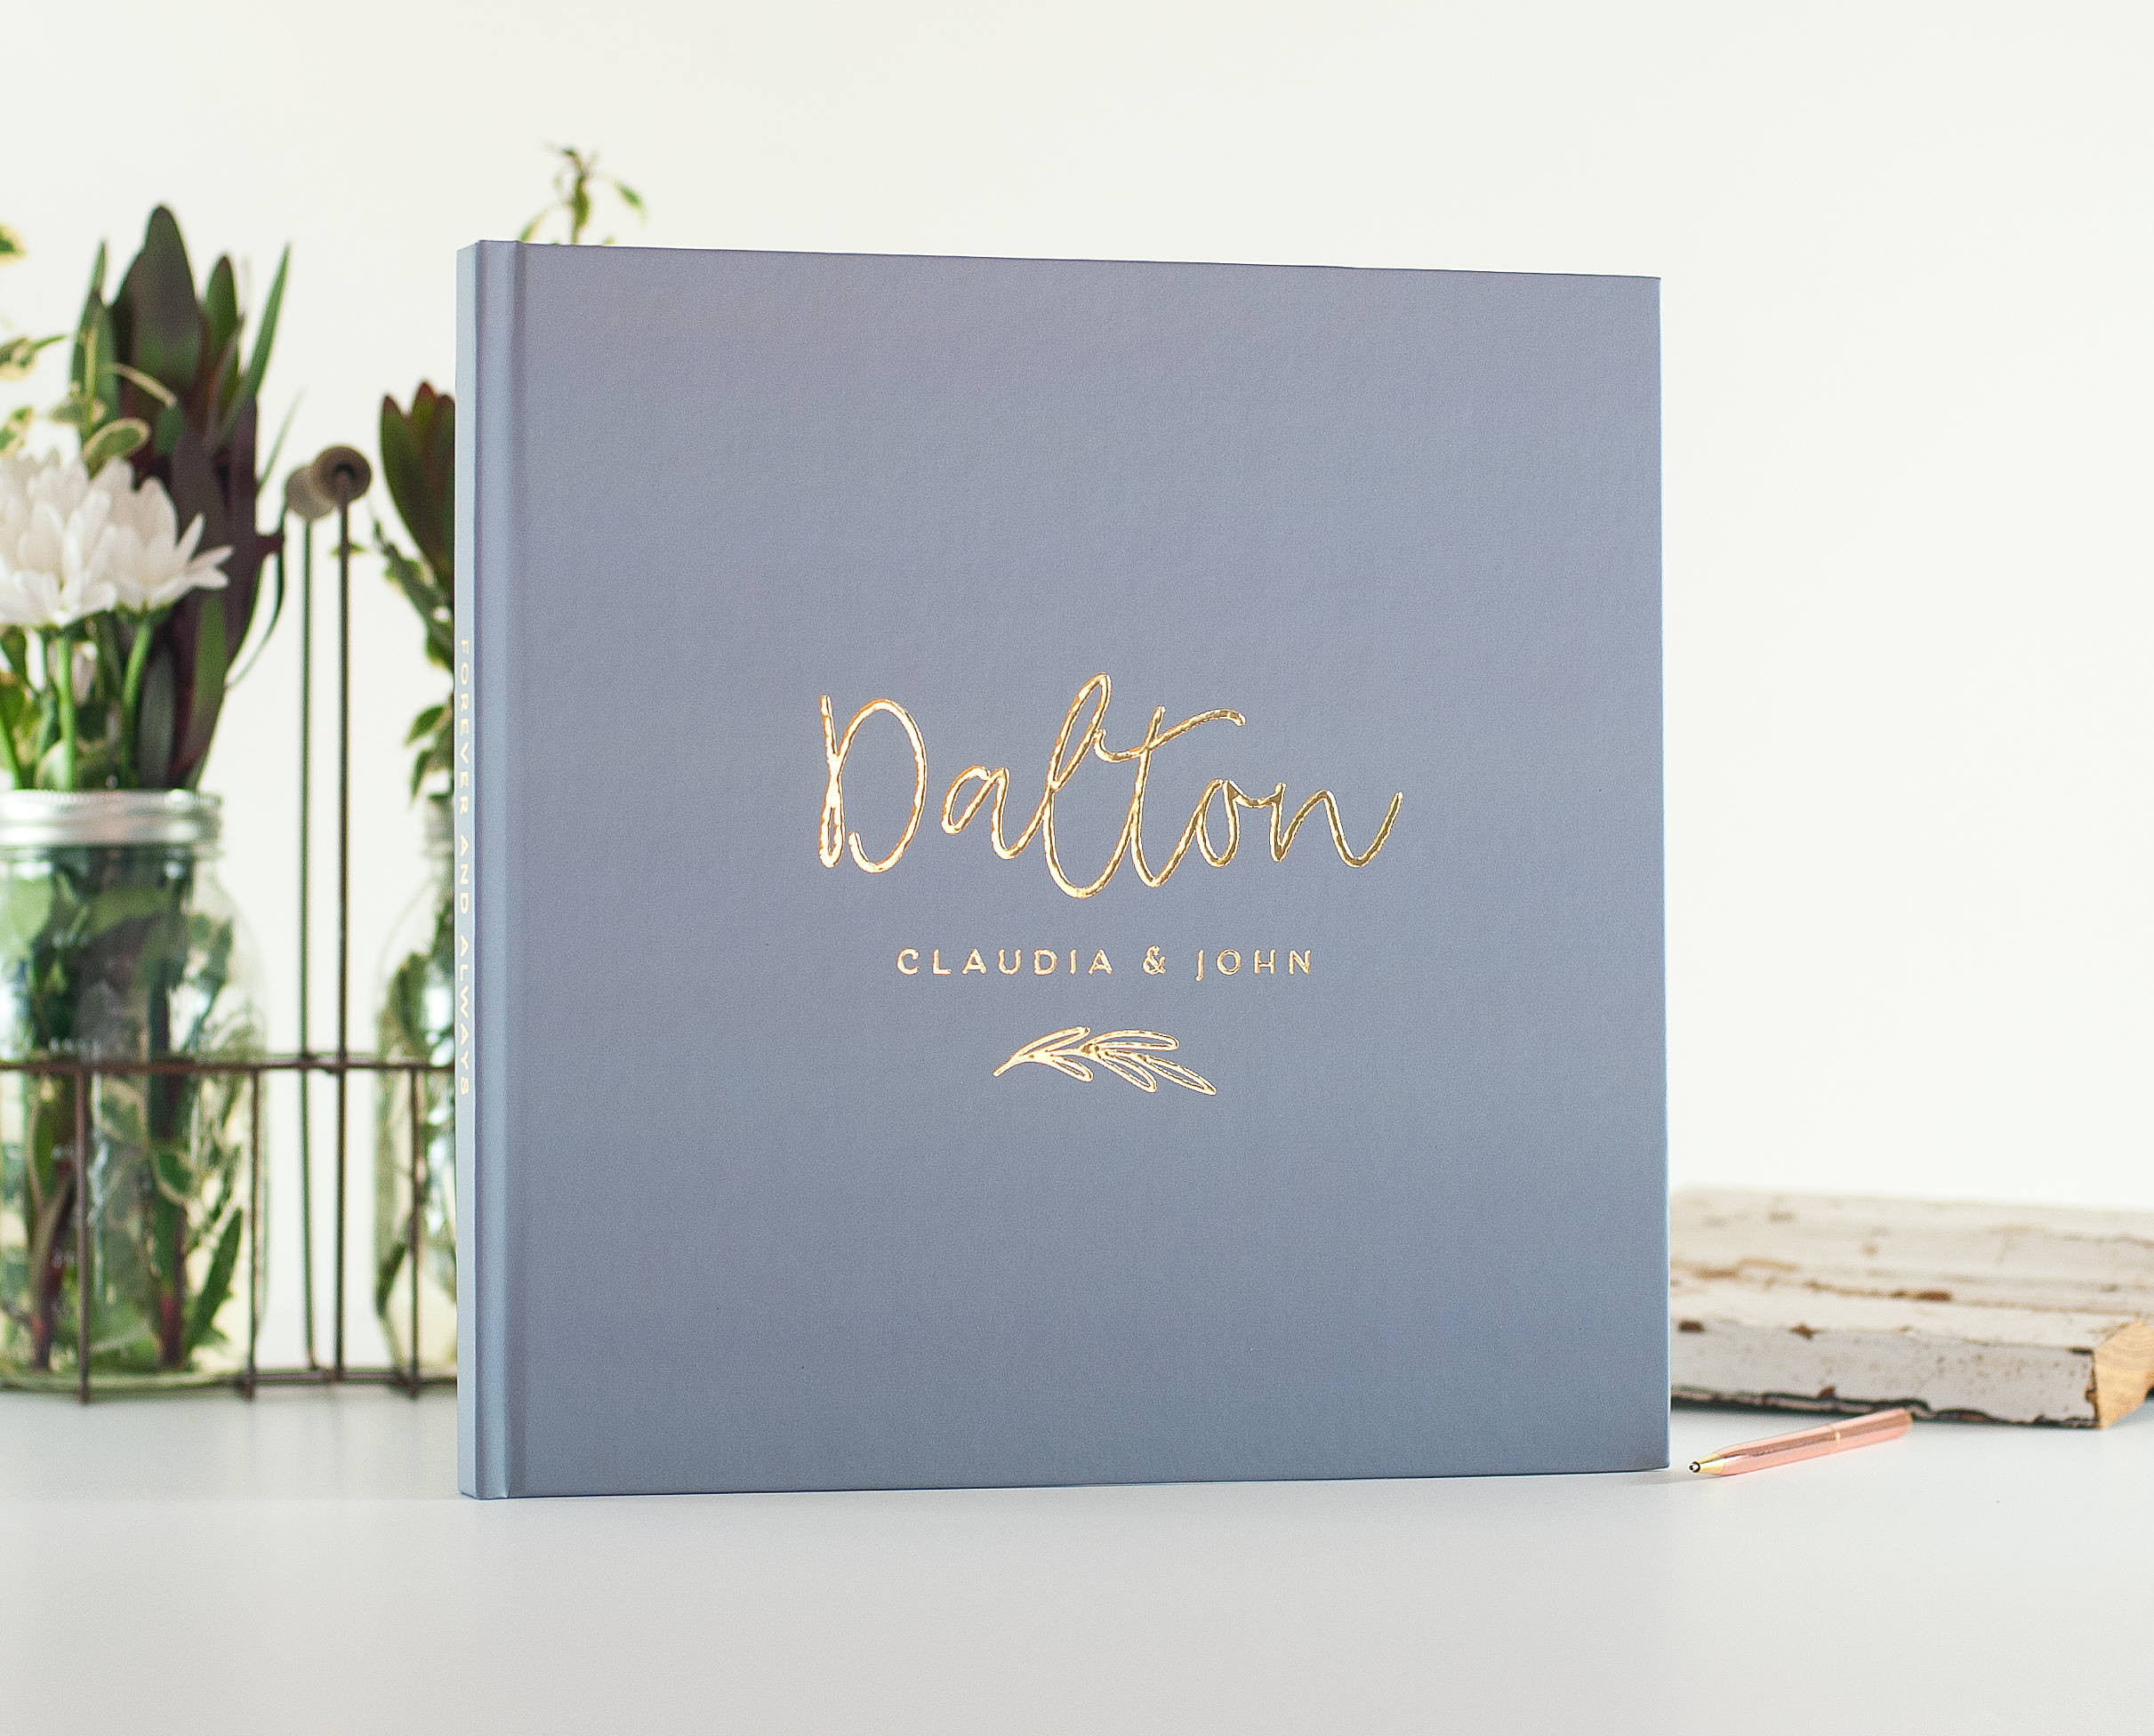 Photo Booth Guest Book Wedding
 Wedding Guest Book Dusty Blue wedding guestbook Gold Foil